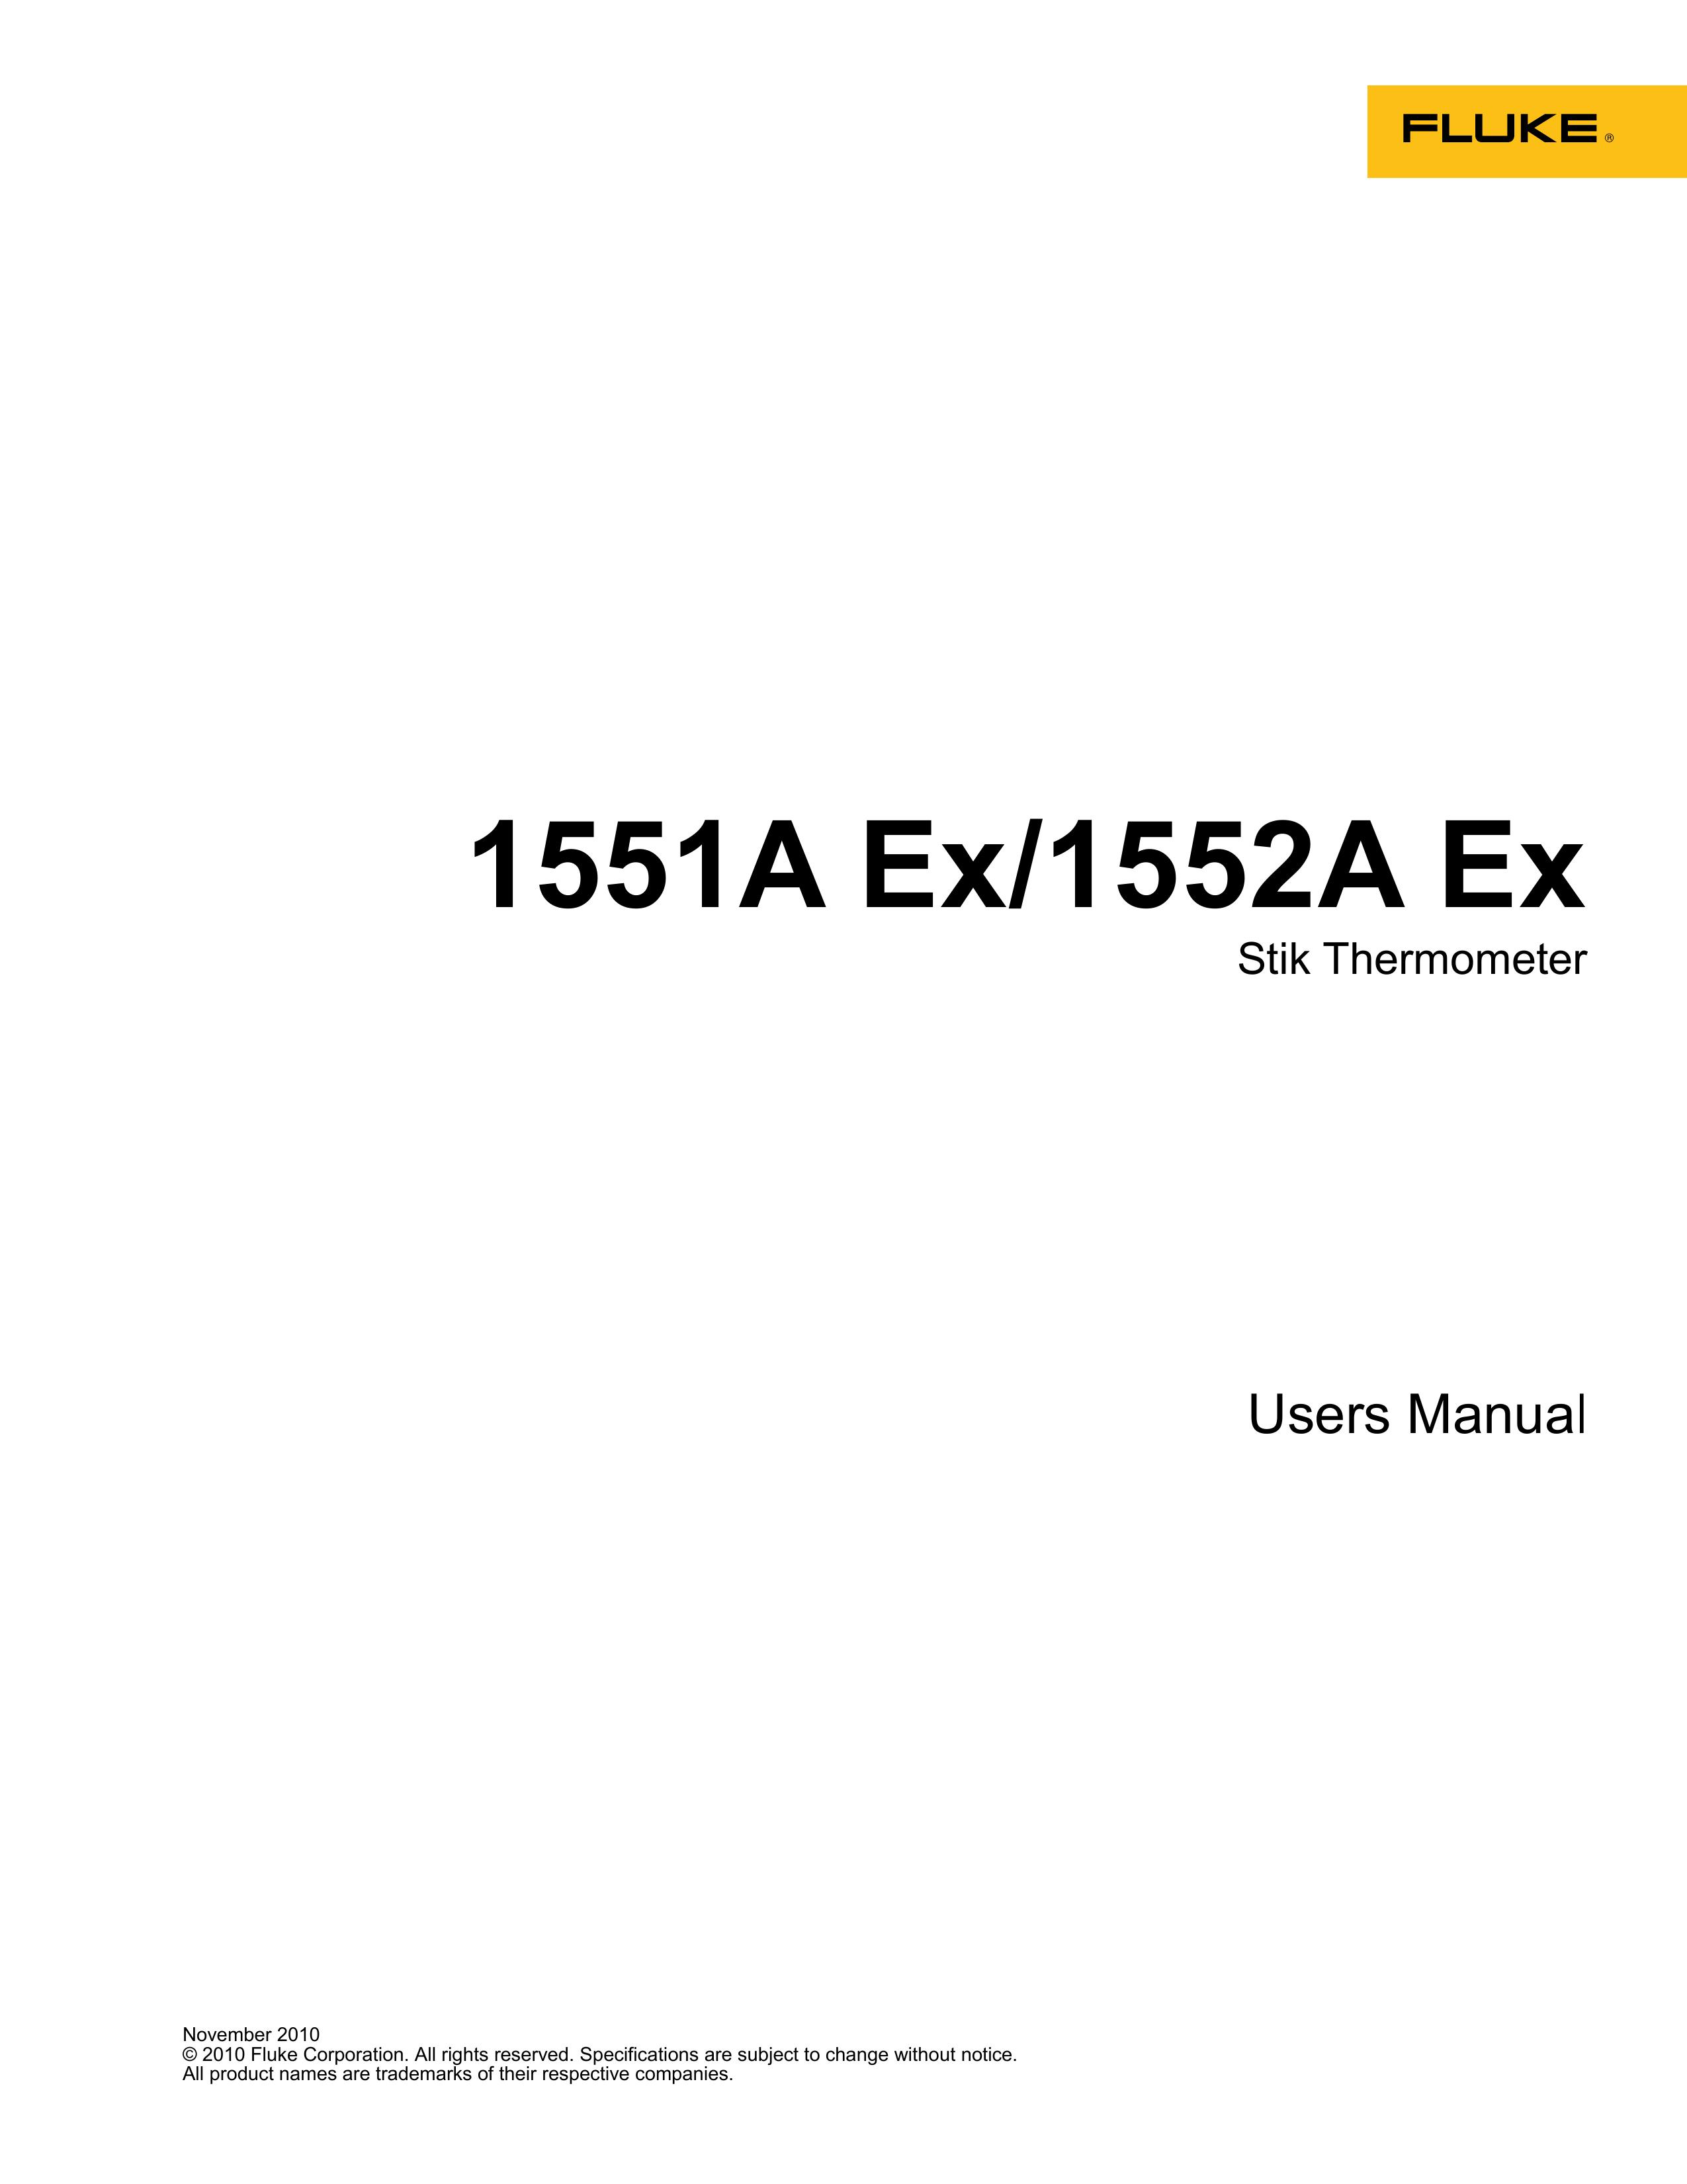 Fluke 1551A EX Thermometer User Manual